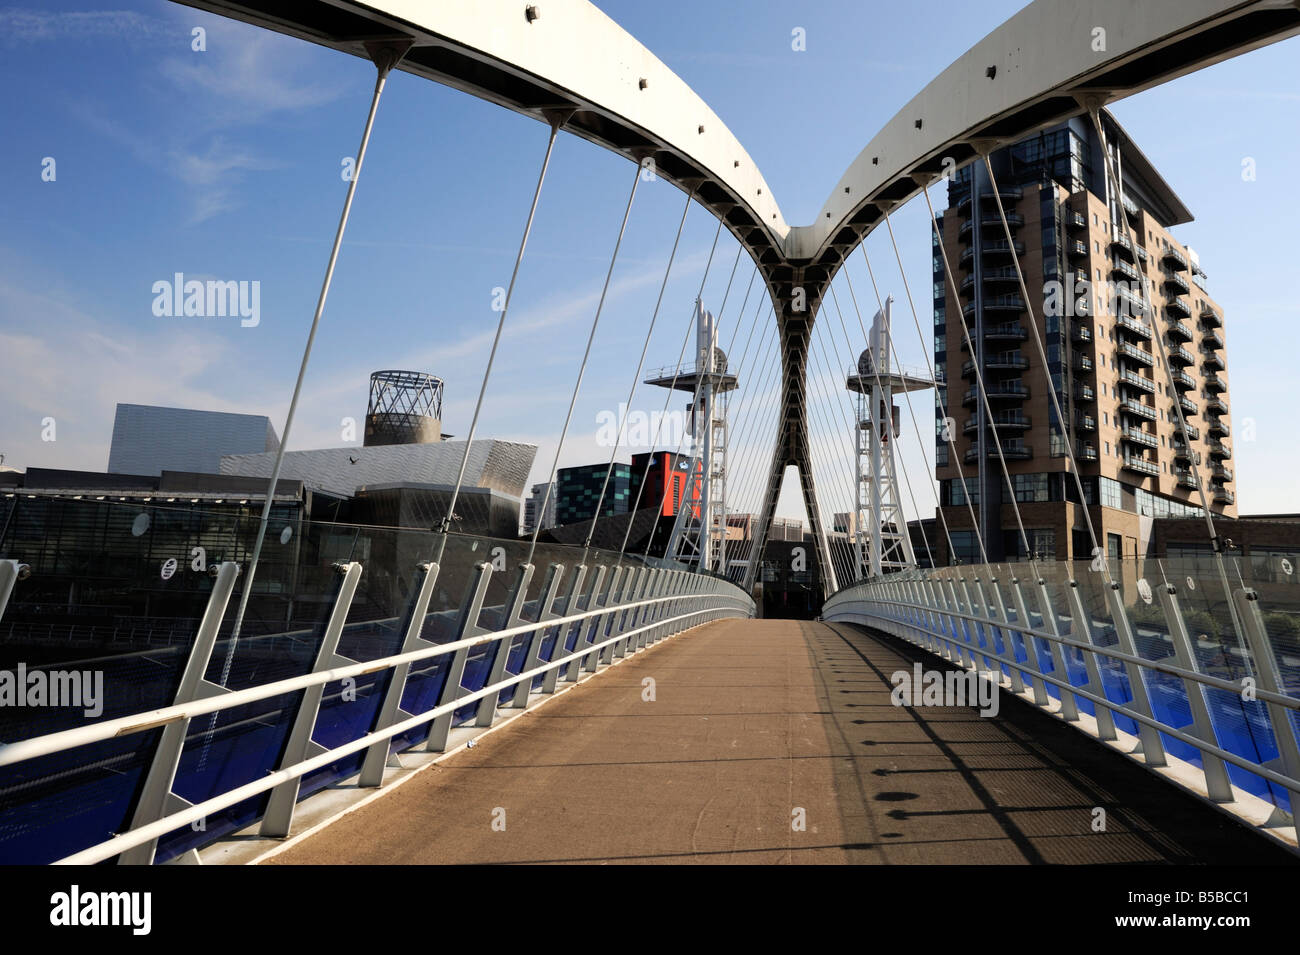 The Lowry Bridge over the Manchester Ship Canal, Salford Quays, Greater Manchester, England, Europe Stock Photo